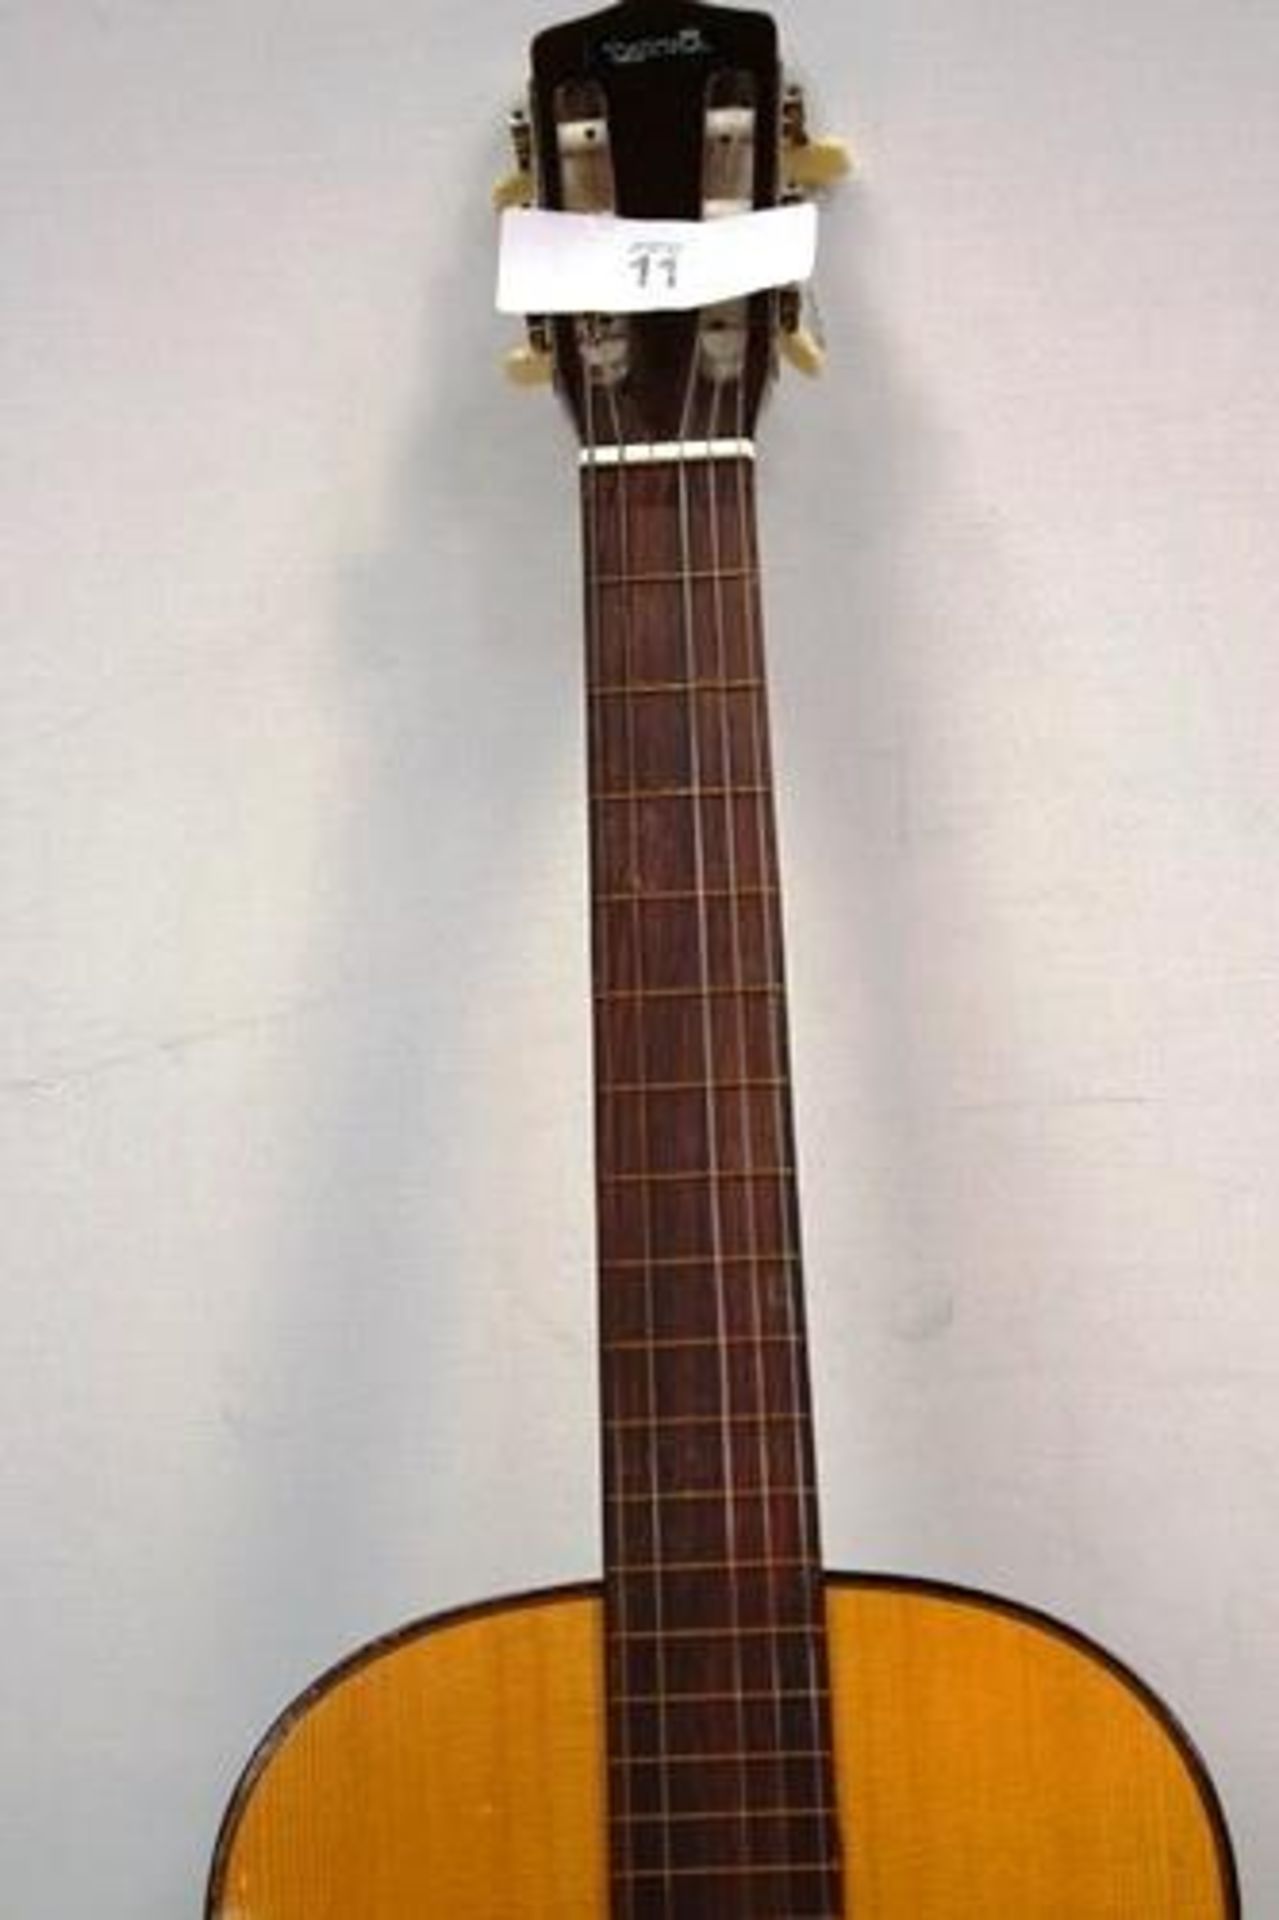 1 x Deluxe Tatra classic foreign acoustic guitar - Second-hand (ES1) - Image 3 of 4